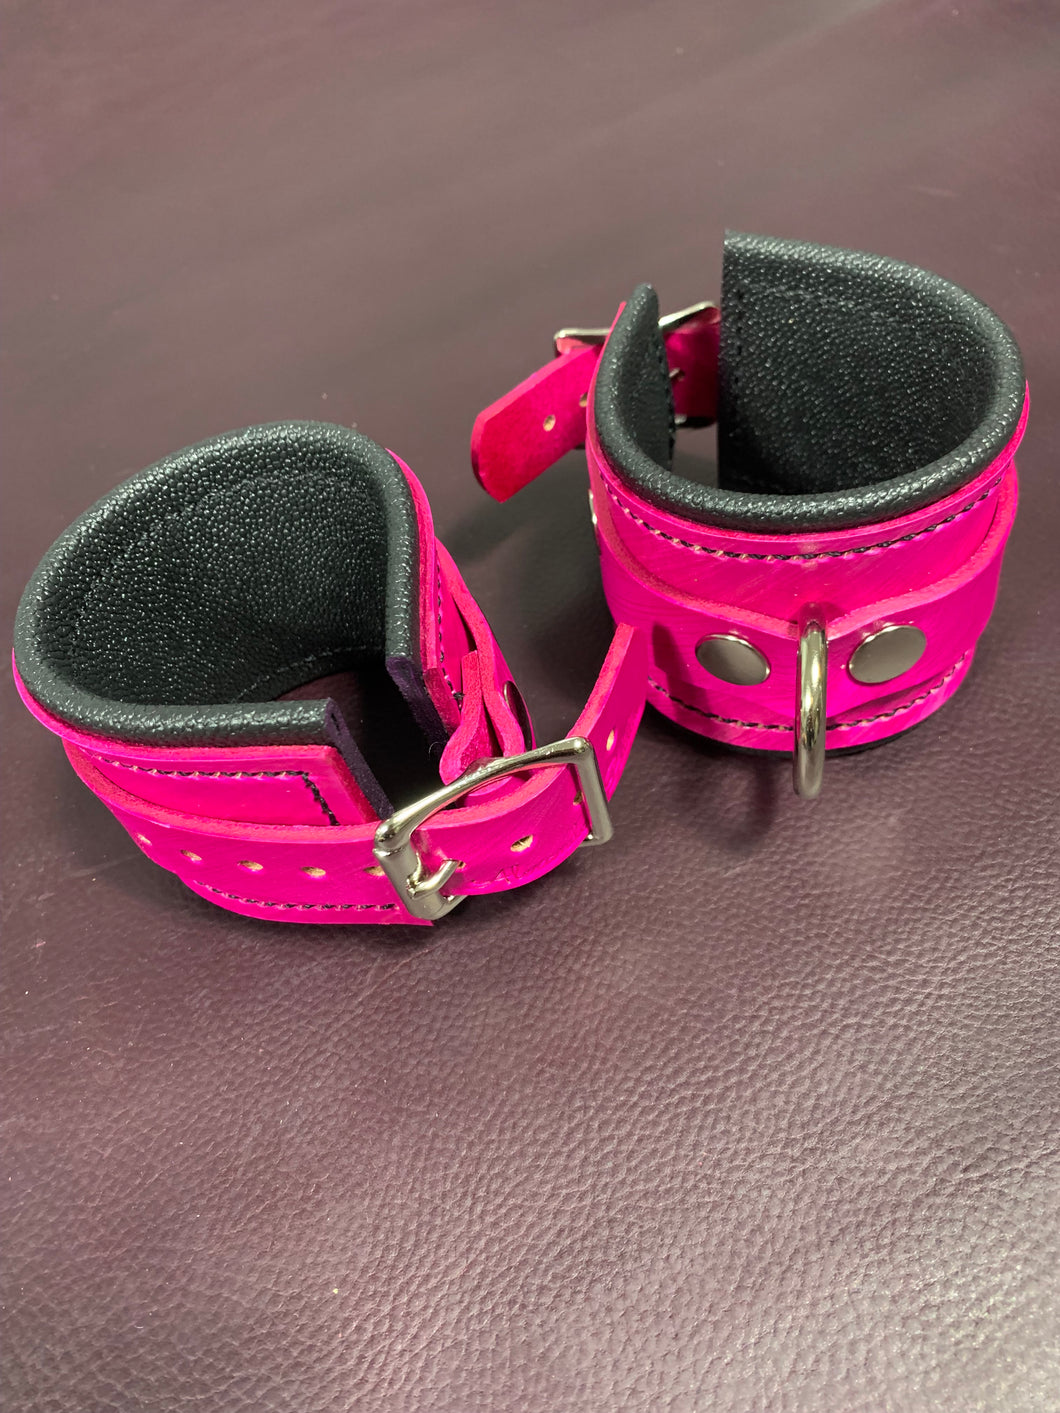 Cuffs: Wrist Cuffs in Pink and Black Leather, One Pair